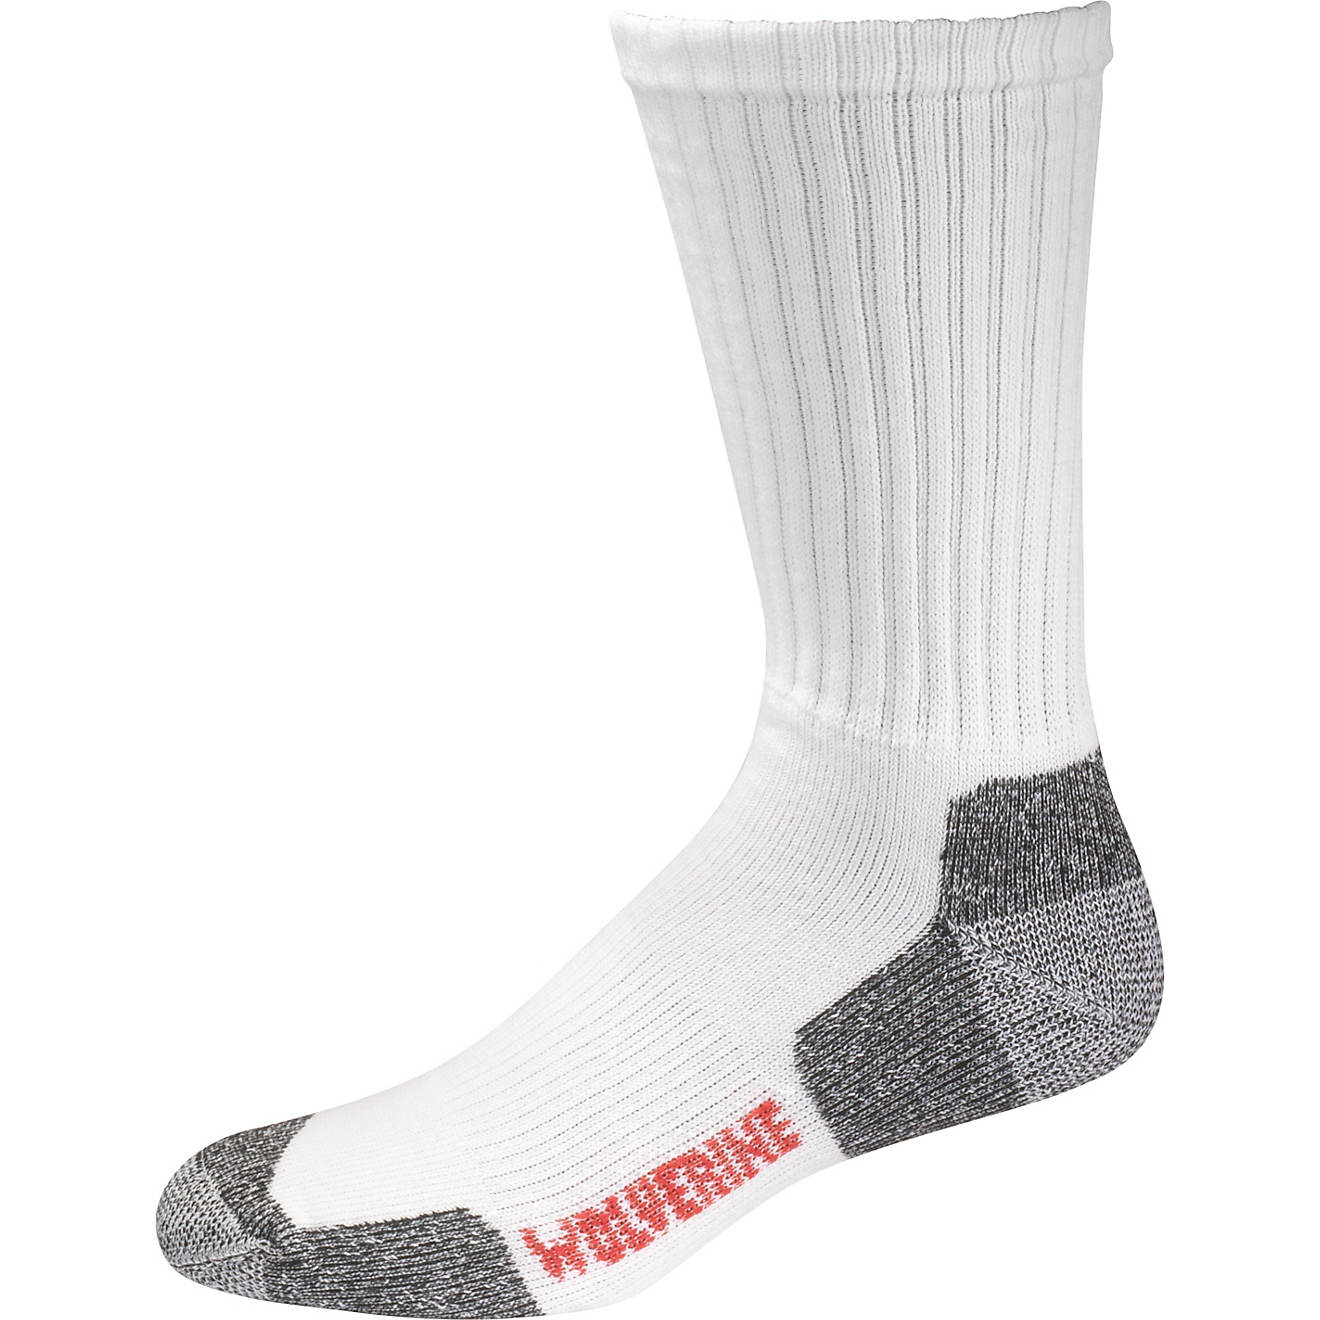 Wolverine Safety Toe Moisture Wicking Work Socks 2 Pack                                                                          - view number 1